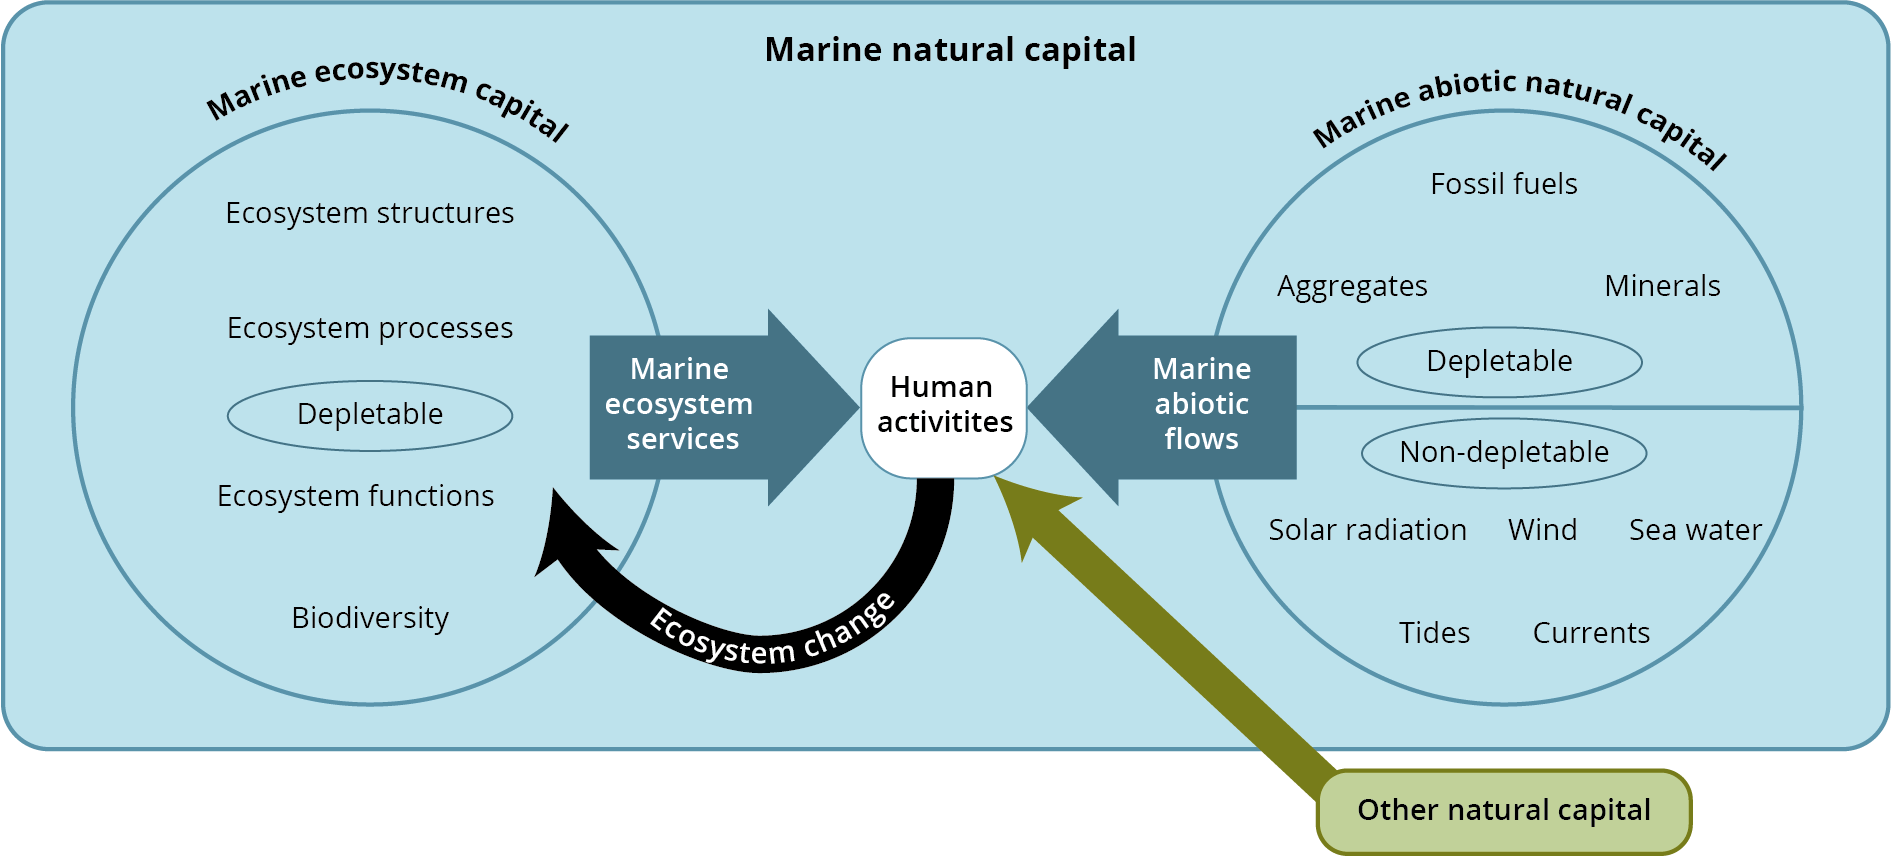 The constituents of marine natural capital